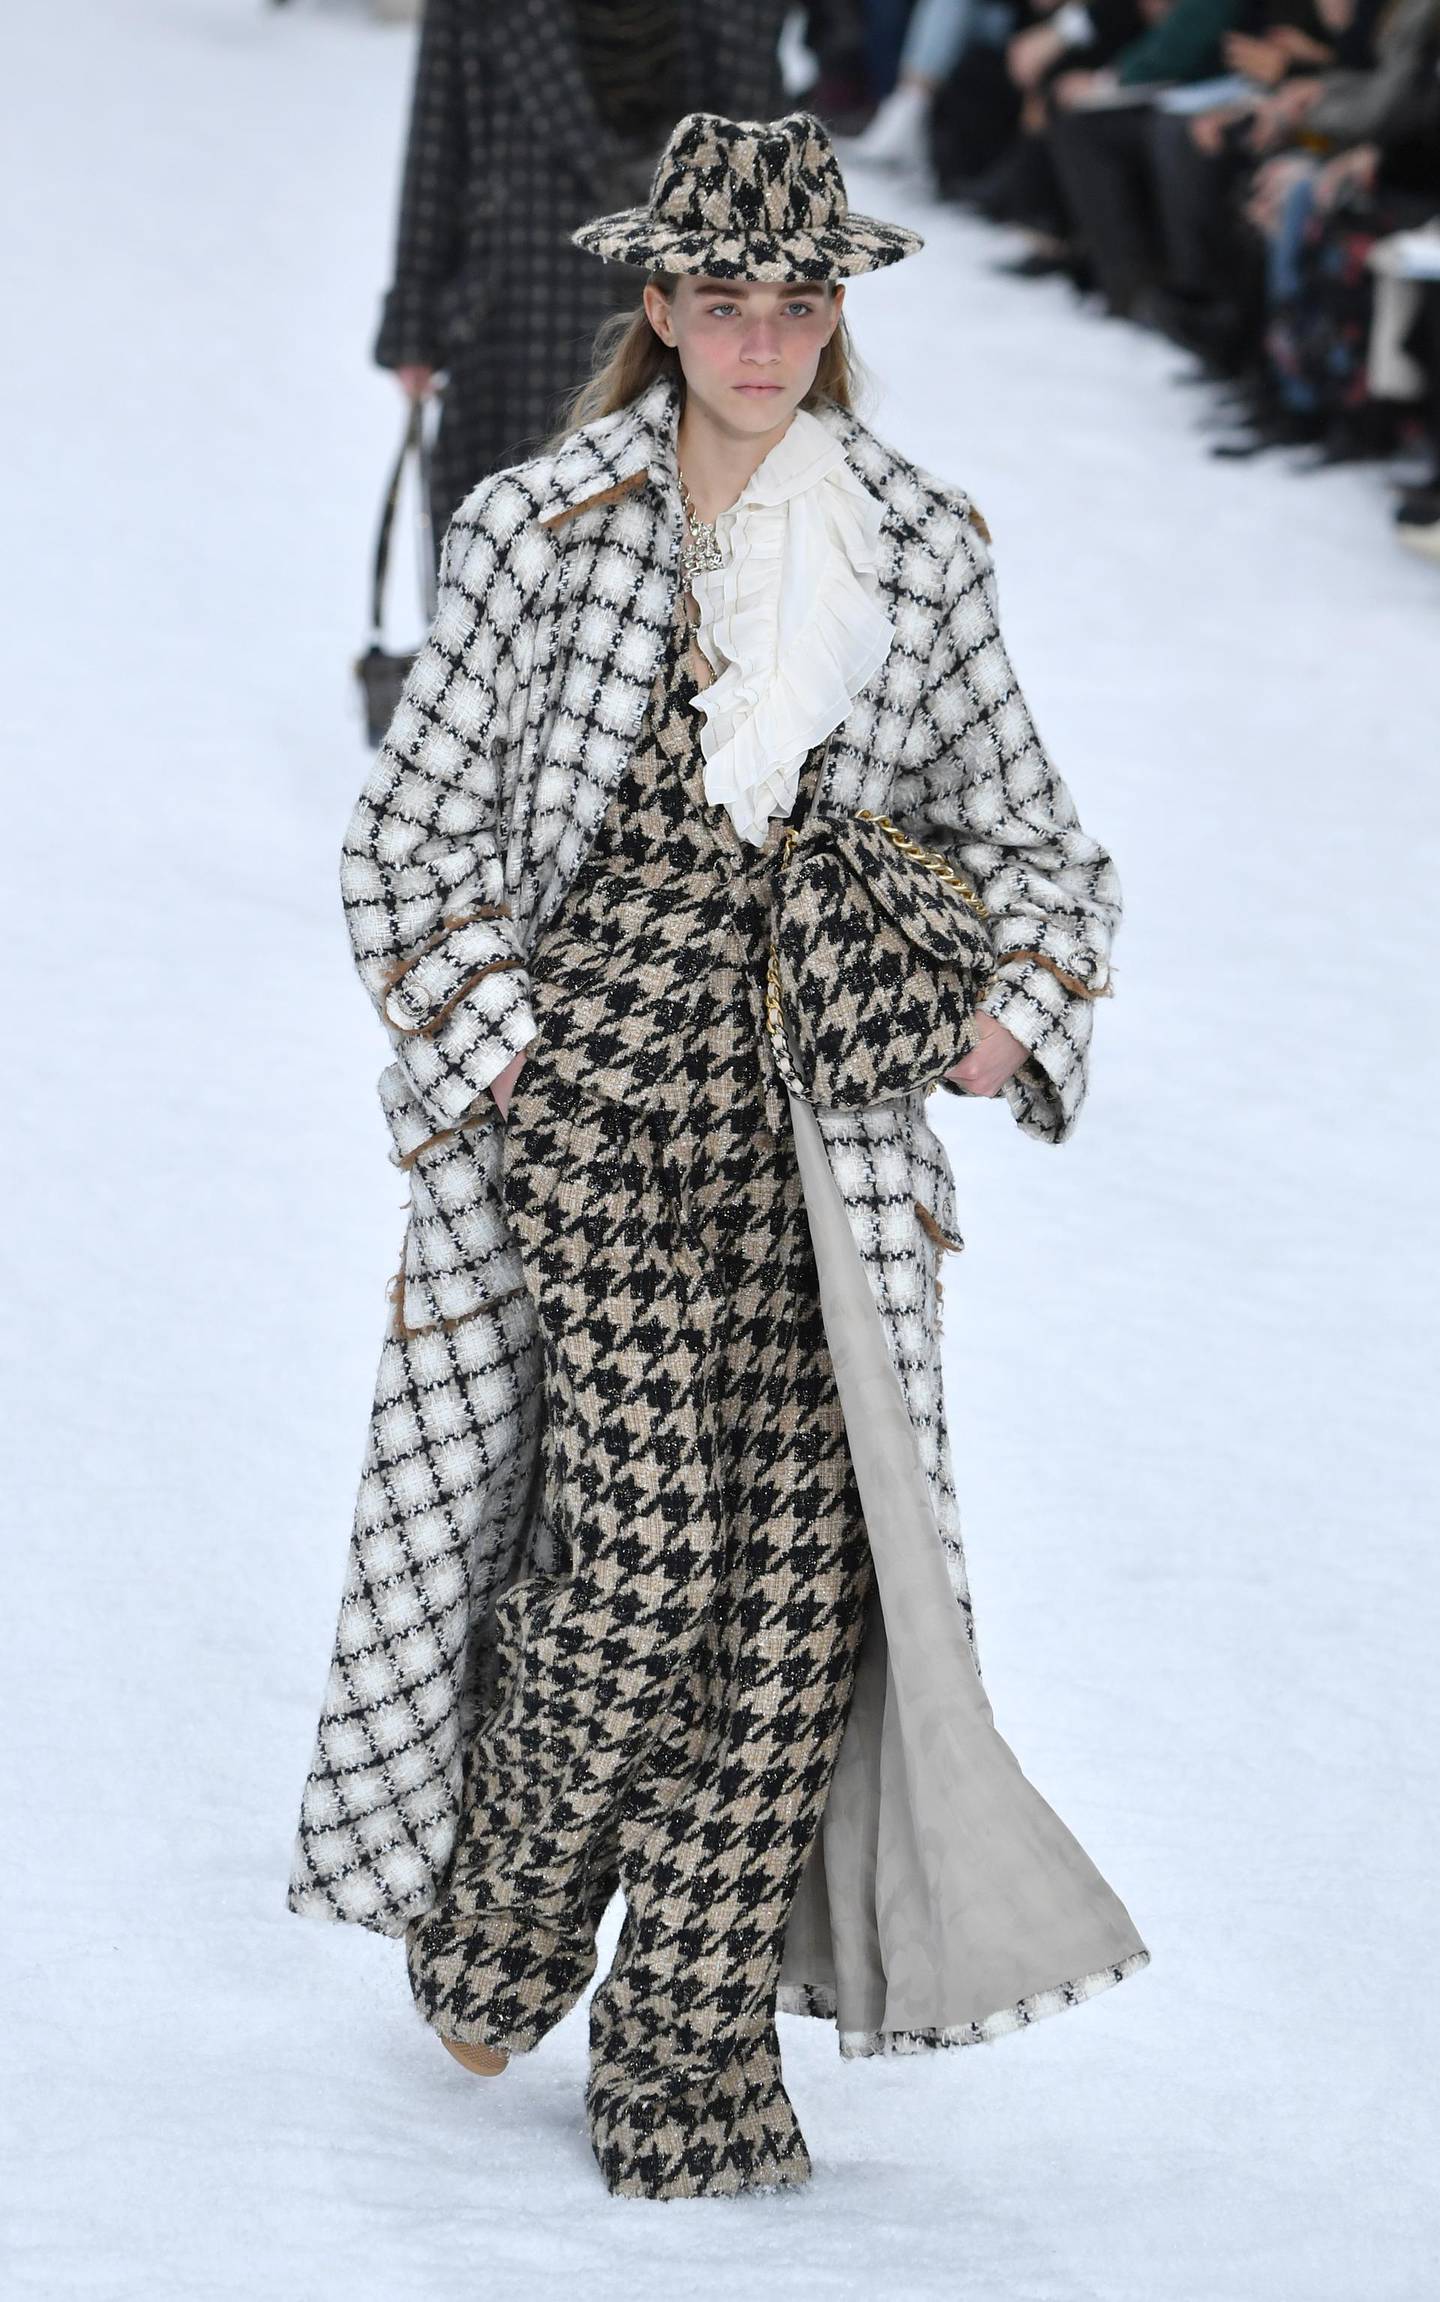 PARIS, FRANCE - MARCH 05: Cara Delevingne walks the runway during the Chanel show as part of the Paris Fashion Week Womenswear Fall/Winter 2019/2020 on March 05, 2019 in Paris, France. (Photo by Pascal Le Segretain/Getty Images)